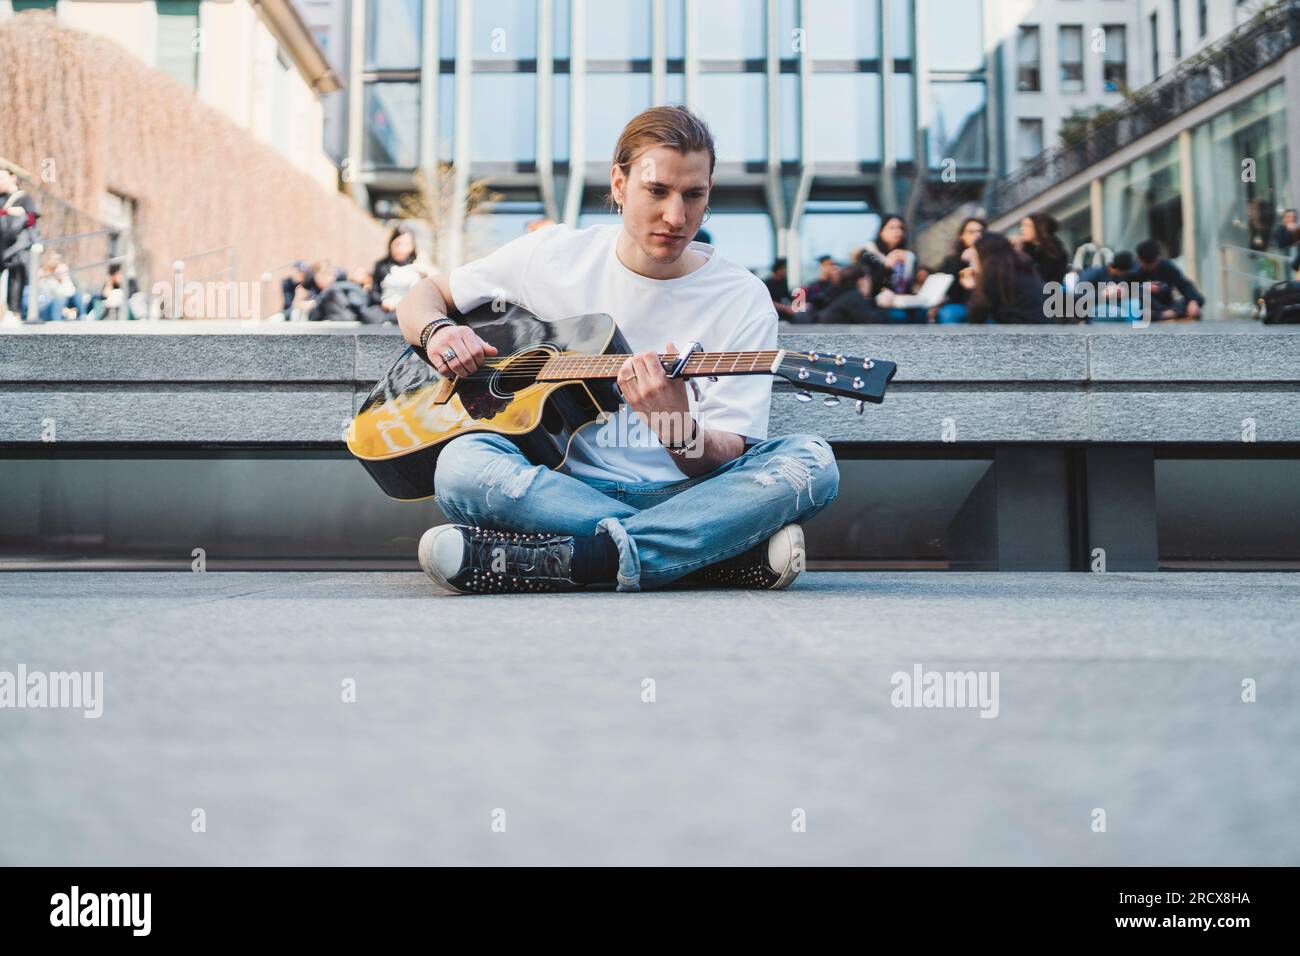 white musician sitting on the floor in a urban square with stone floor Stock Photo